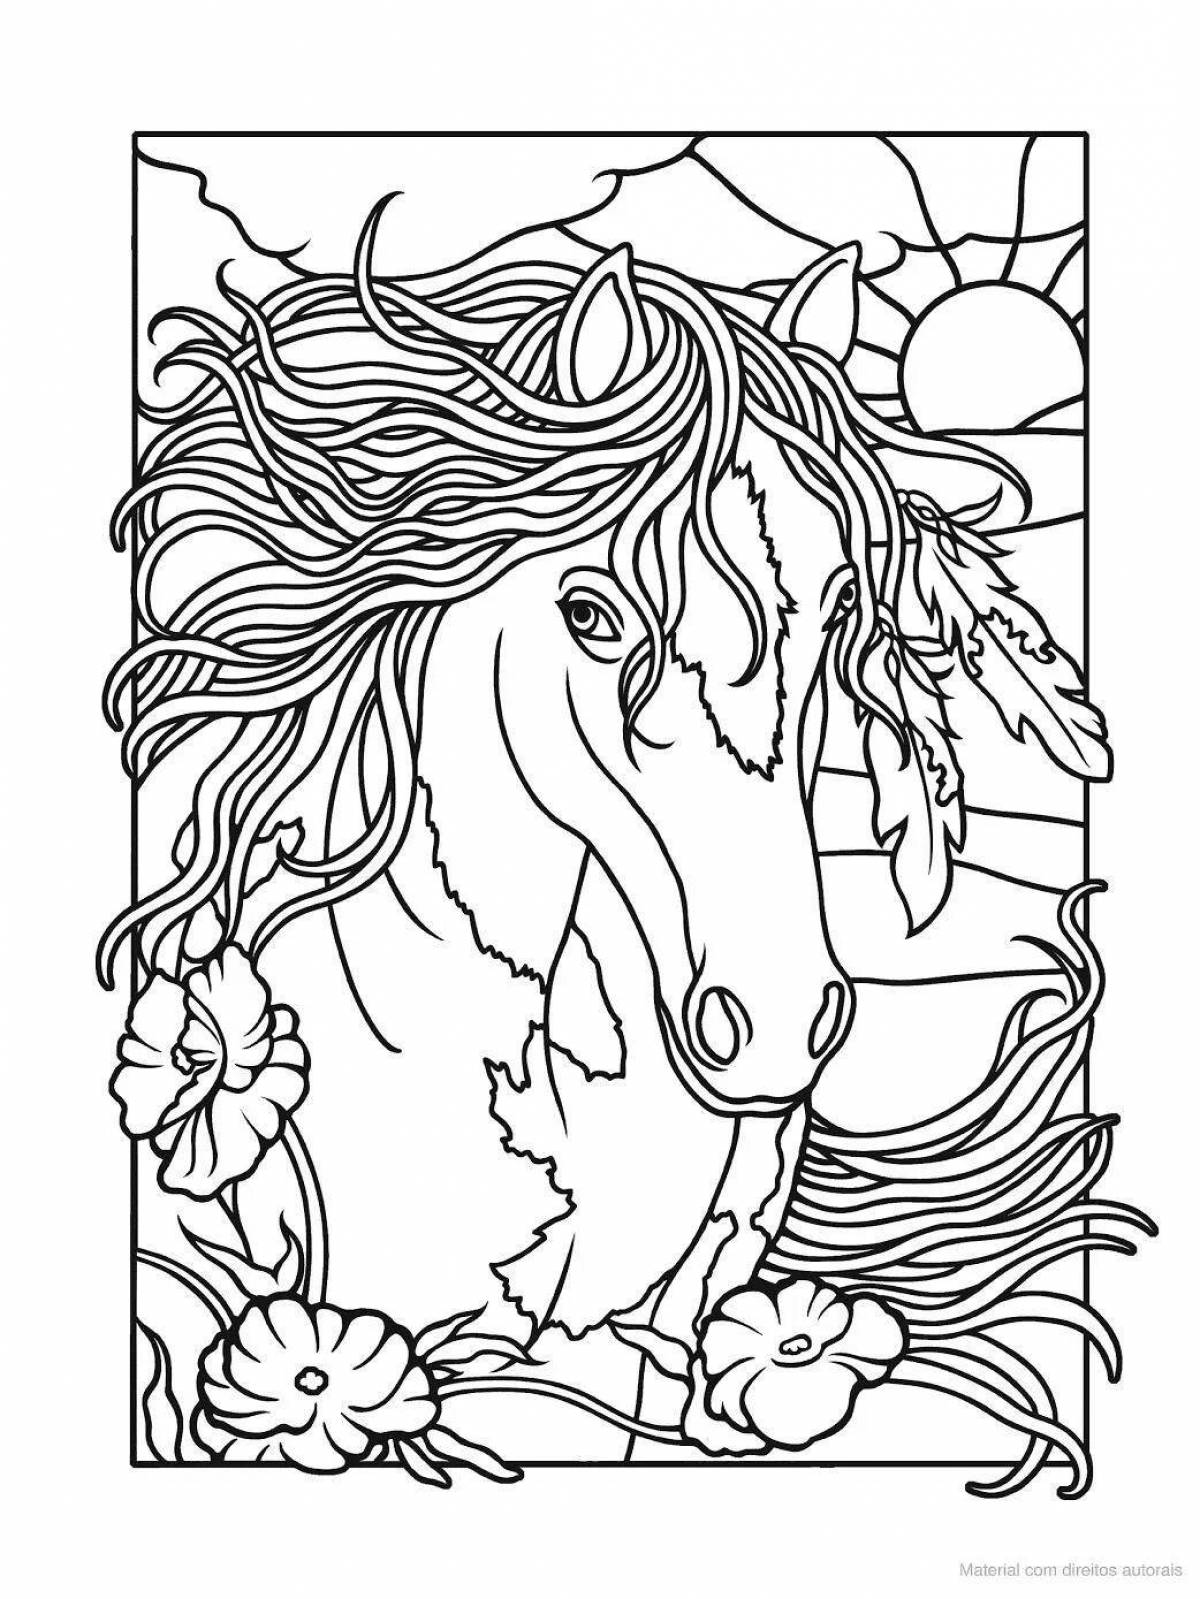 Intricate complex coloring page